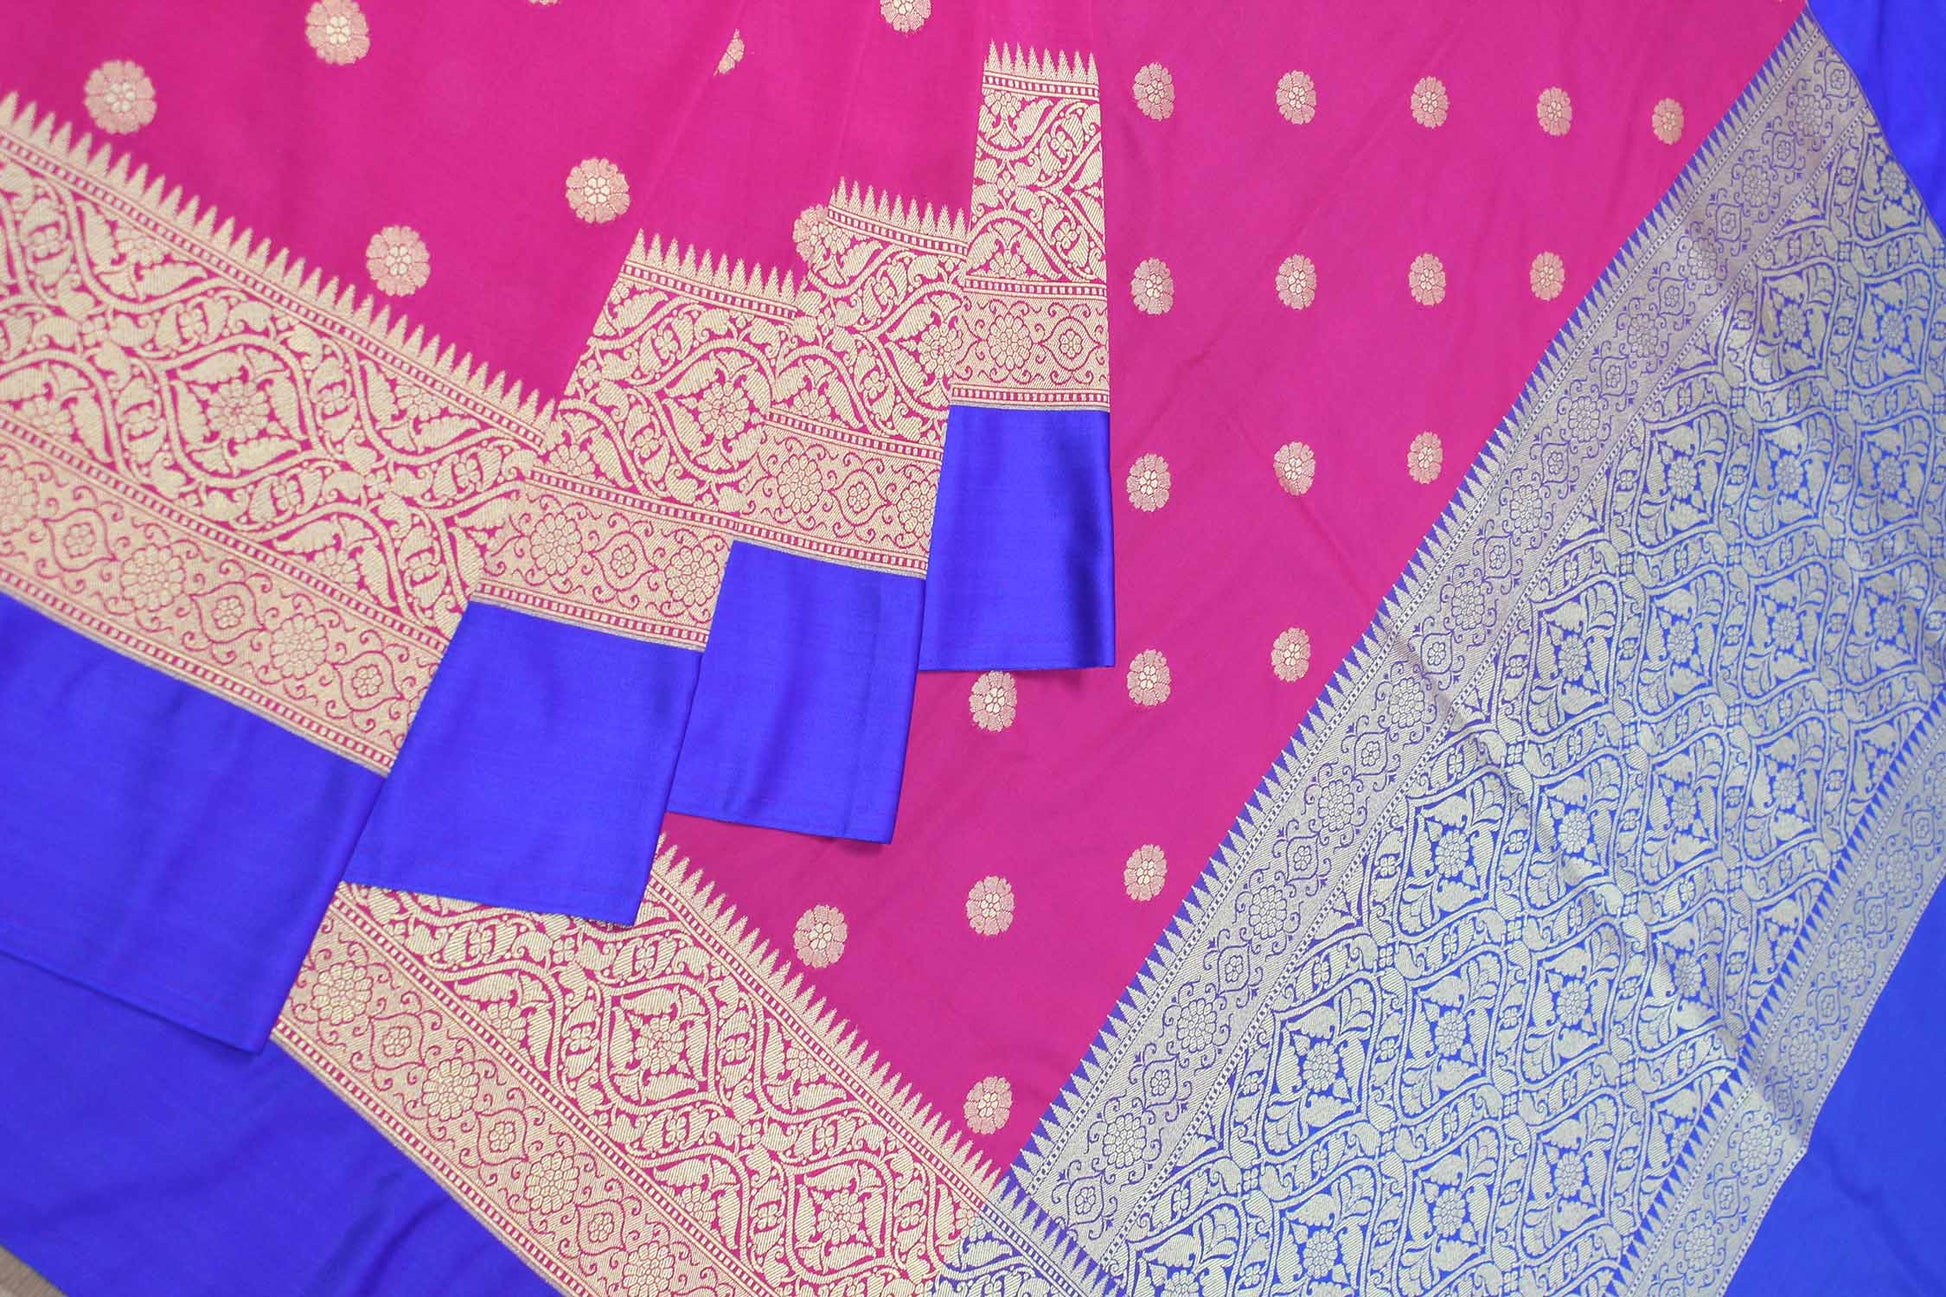 Shop Now for Pink Handloom Banarasi Soft Silk Saree with Contrast Border - Latest Collection - Luxurion World